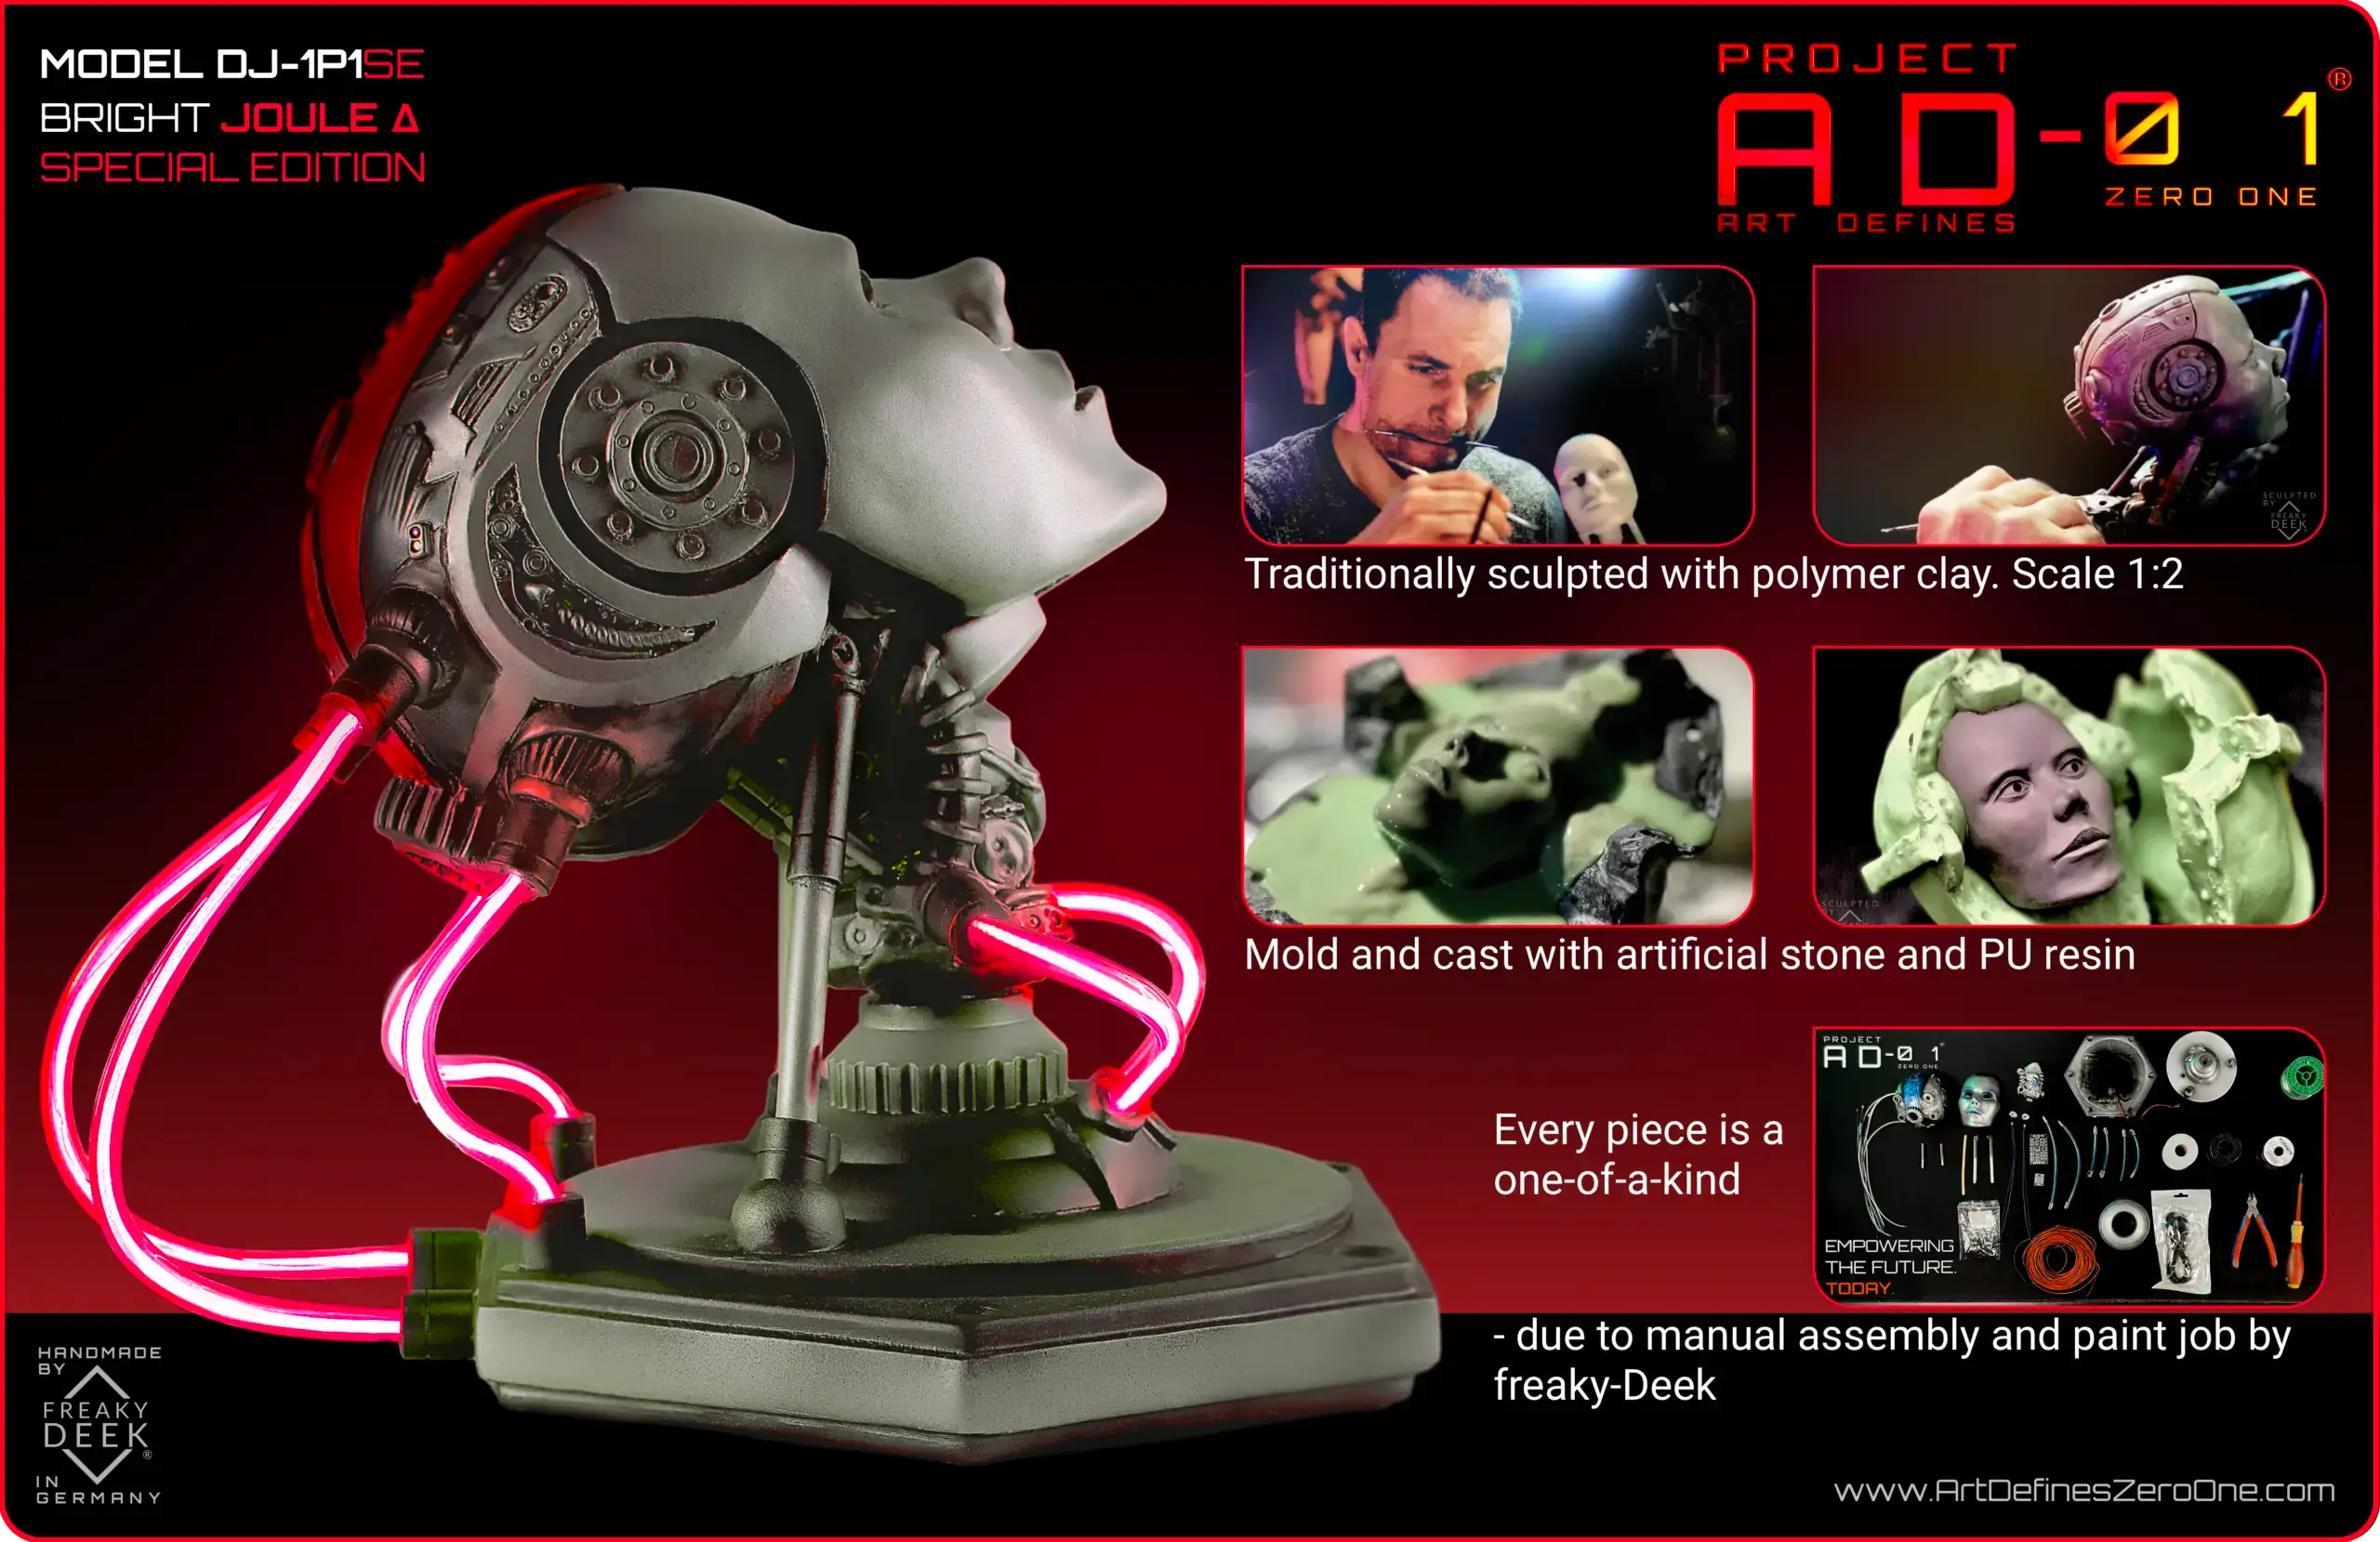 Project AD-01 handmade android sculpture bright Joule Special Edition with red LED energy tubes, product details: traditionally sculpted with polymer clay, scale 1:2, mold and cast by hand with polystone and PU resin, handpainted and assembled